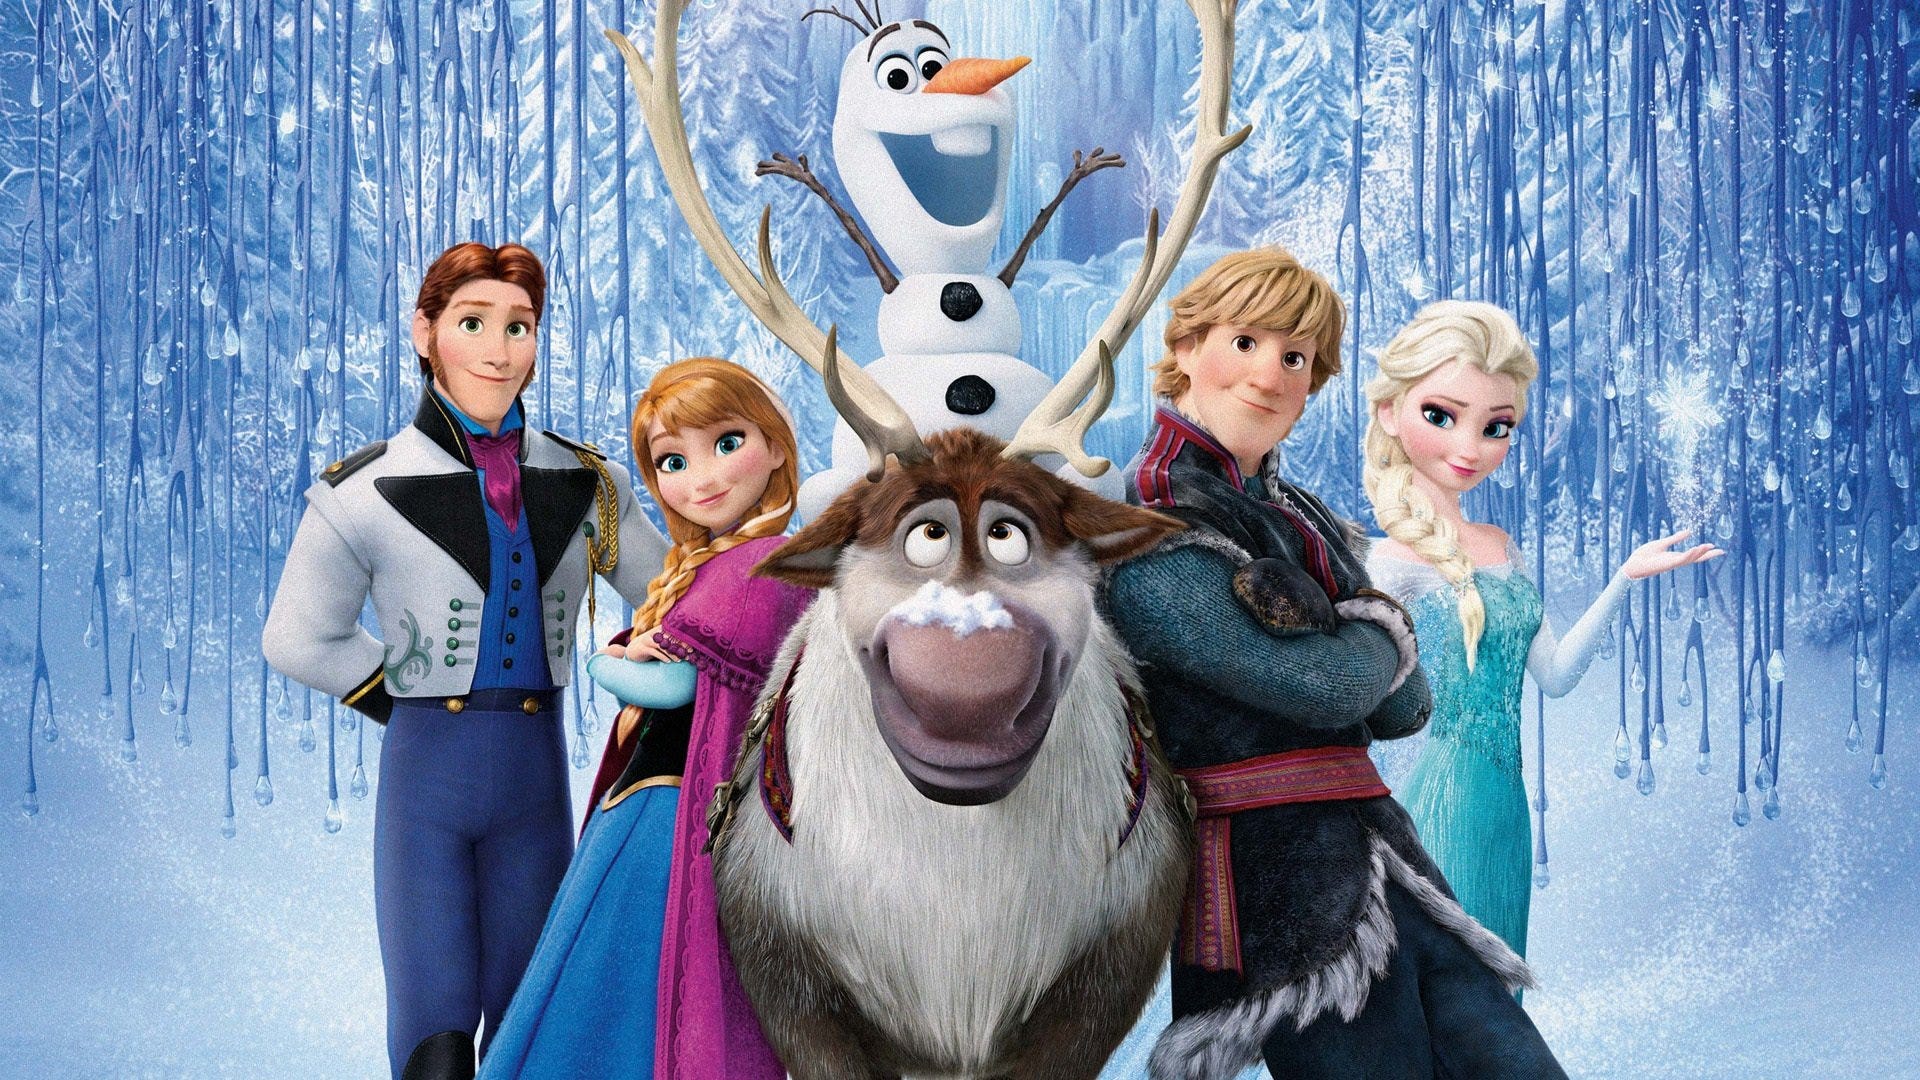 Dream Casting: The 7 Leading Men Destined to Play Hans, Kristoff, and Olaf  in “Frozen” on Broadway!, by Gianluca Russo, BROADWAY LIVE